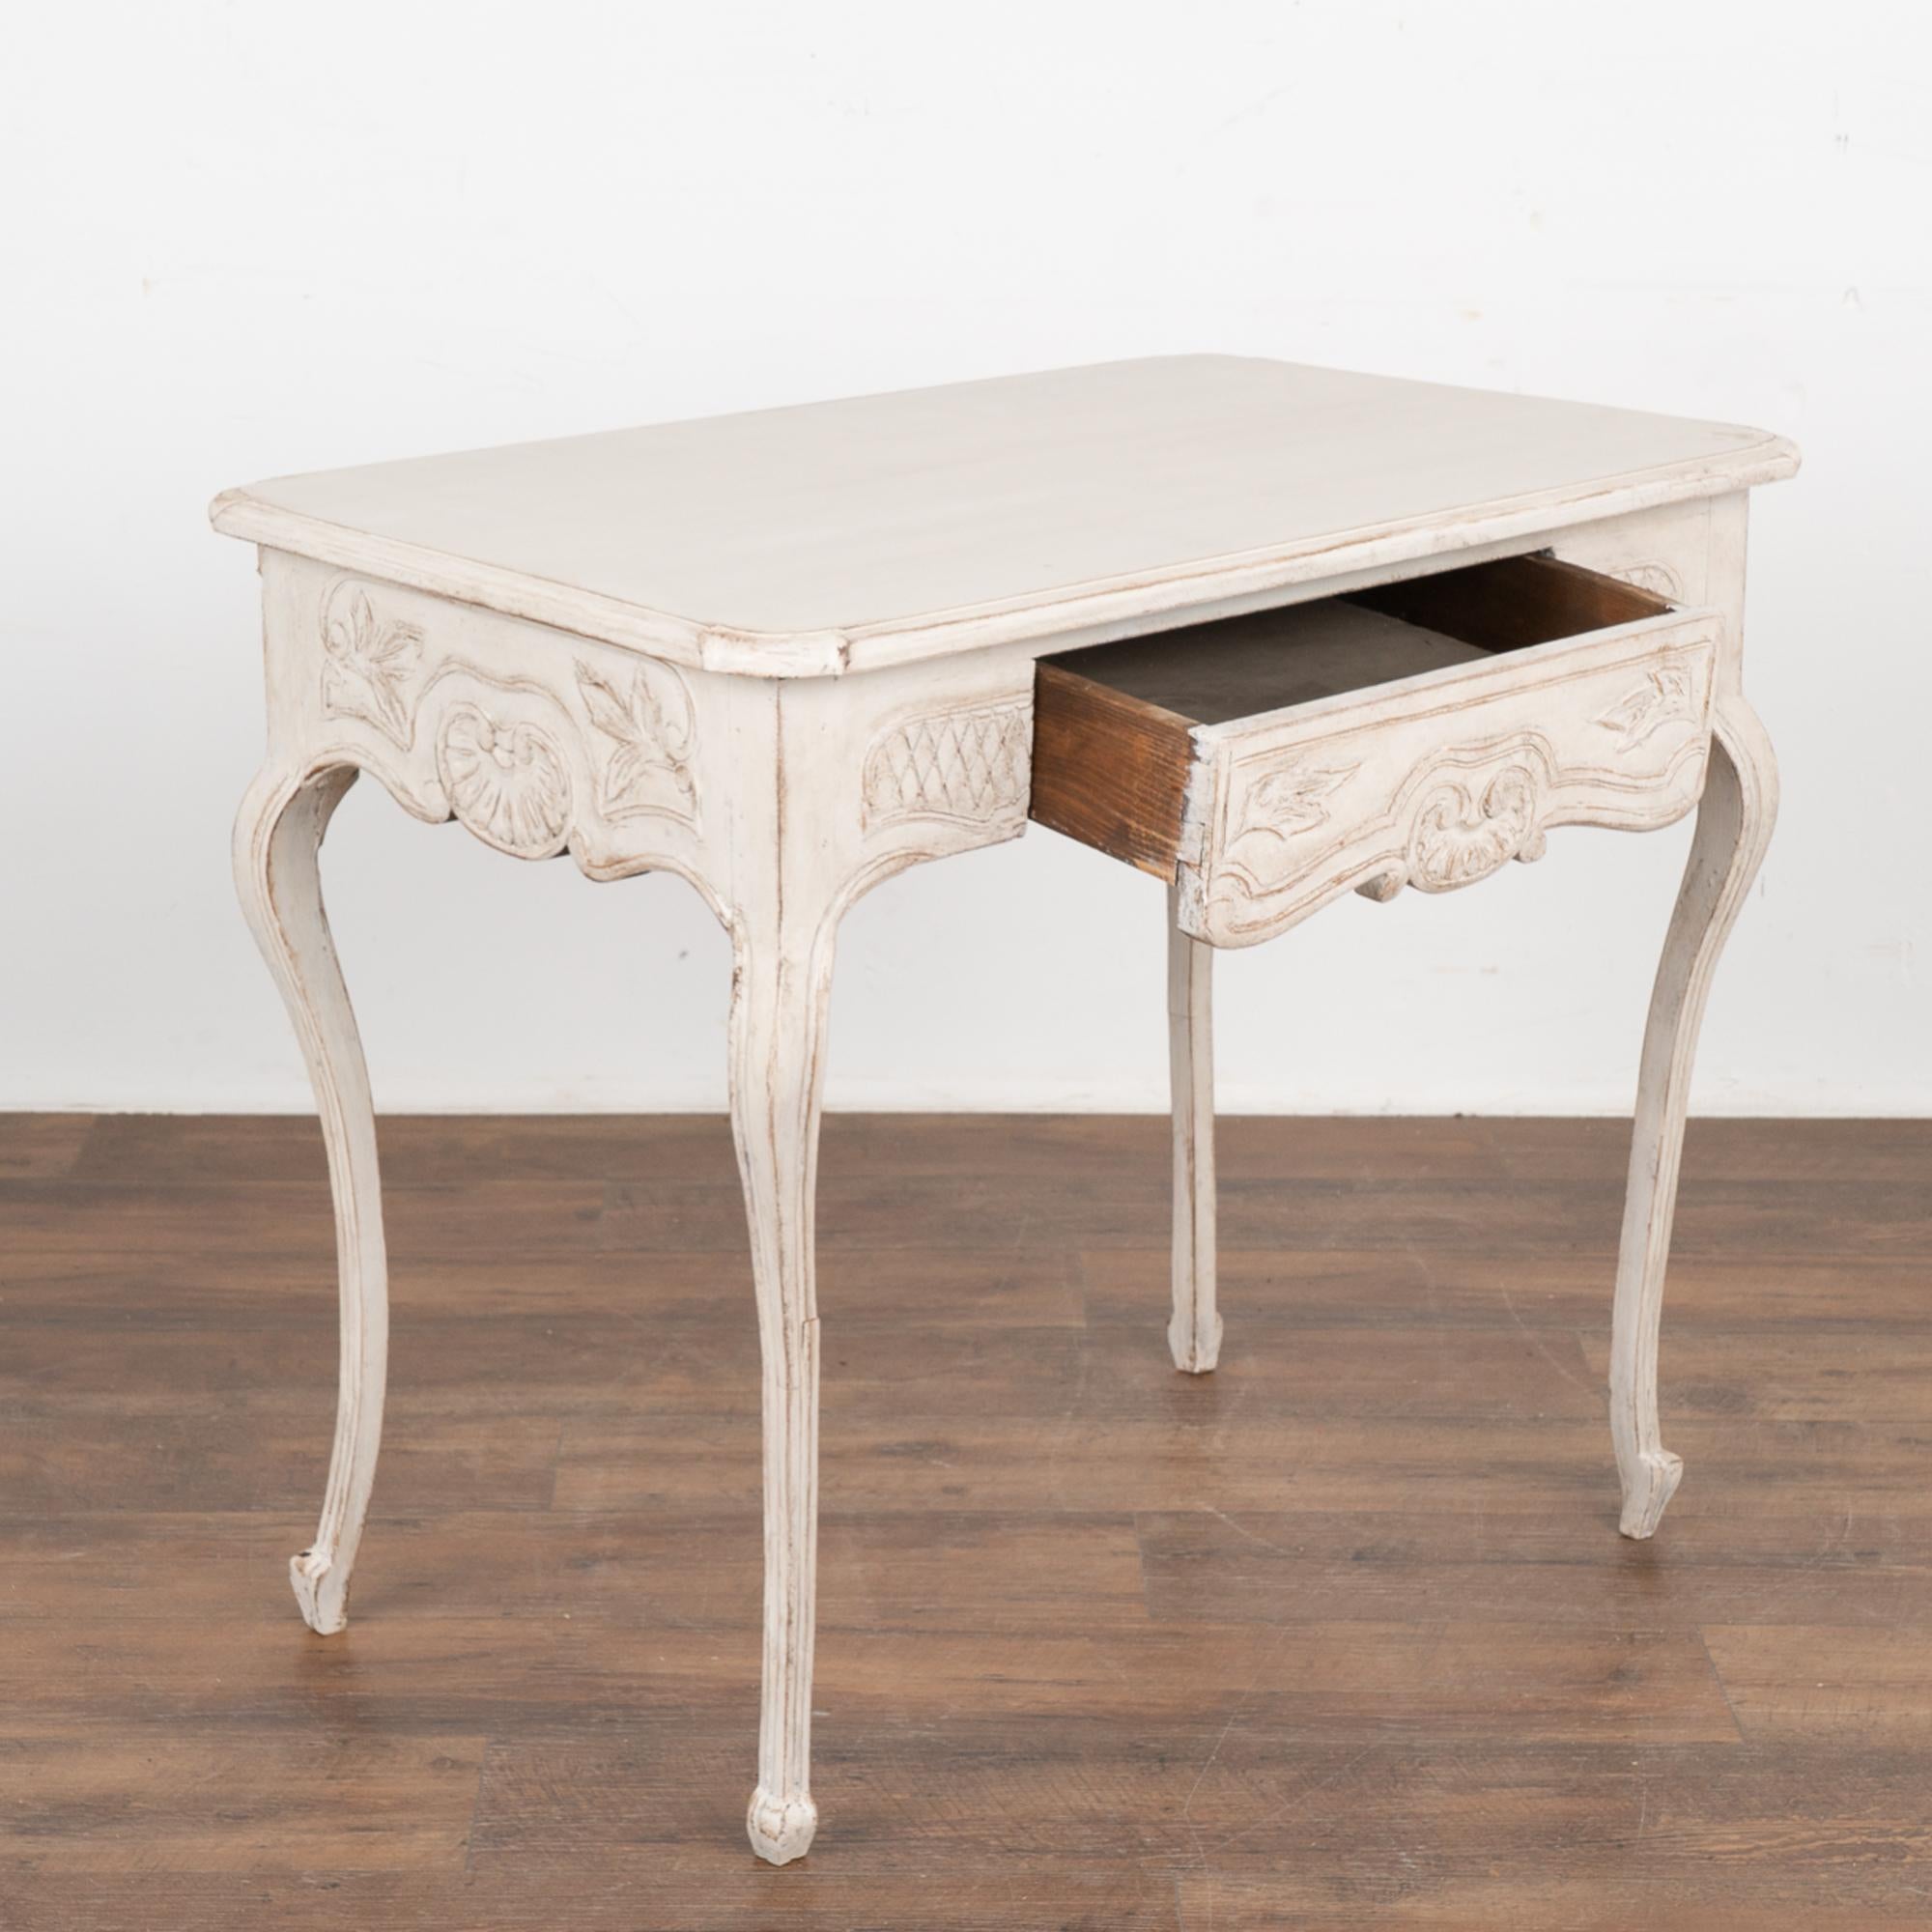 Swedish Gustavian White Painted Side Table With Drawer, Sweden circa 1820-40 For Sale